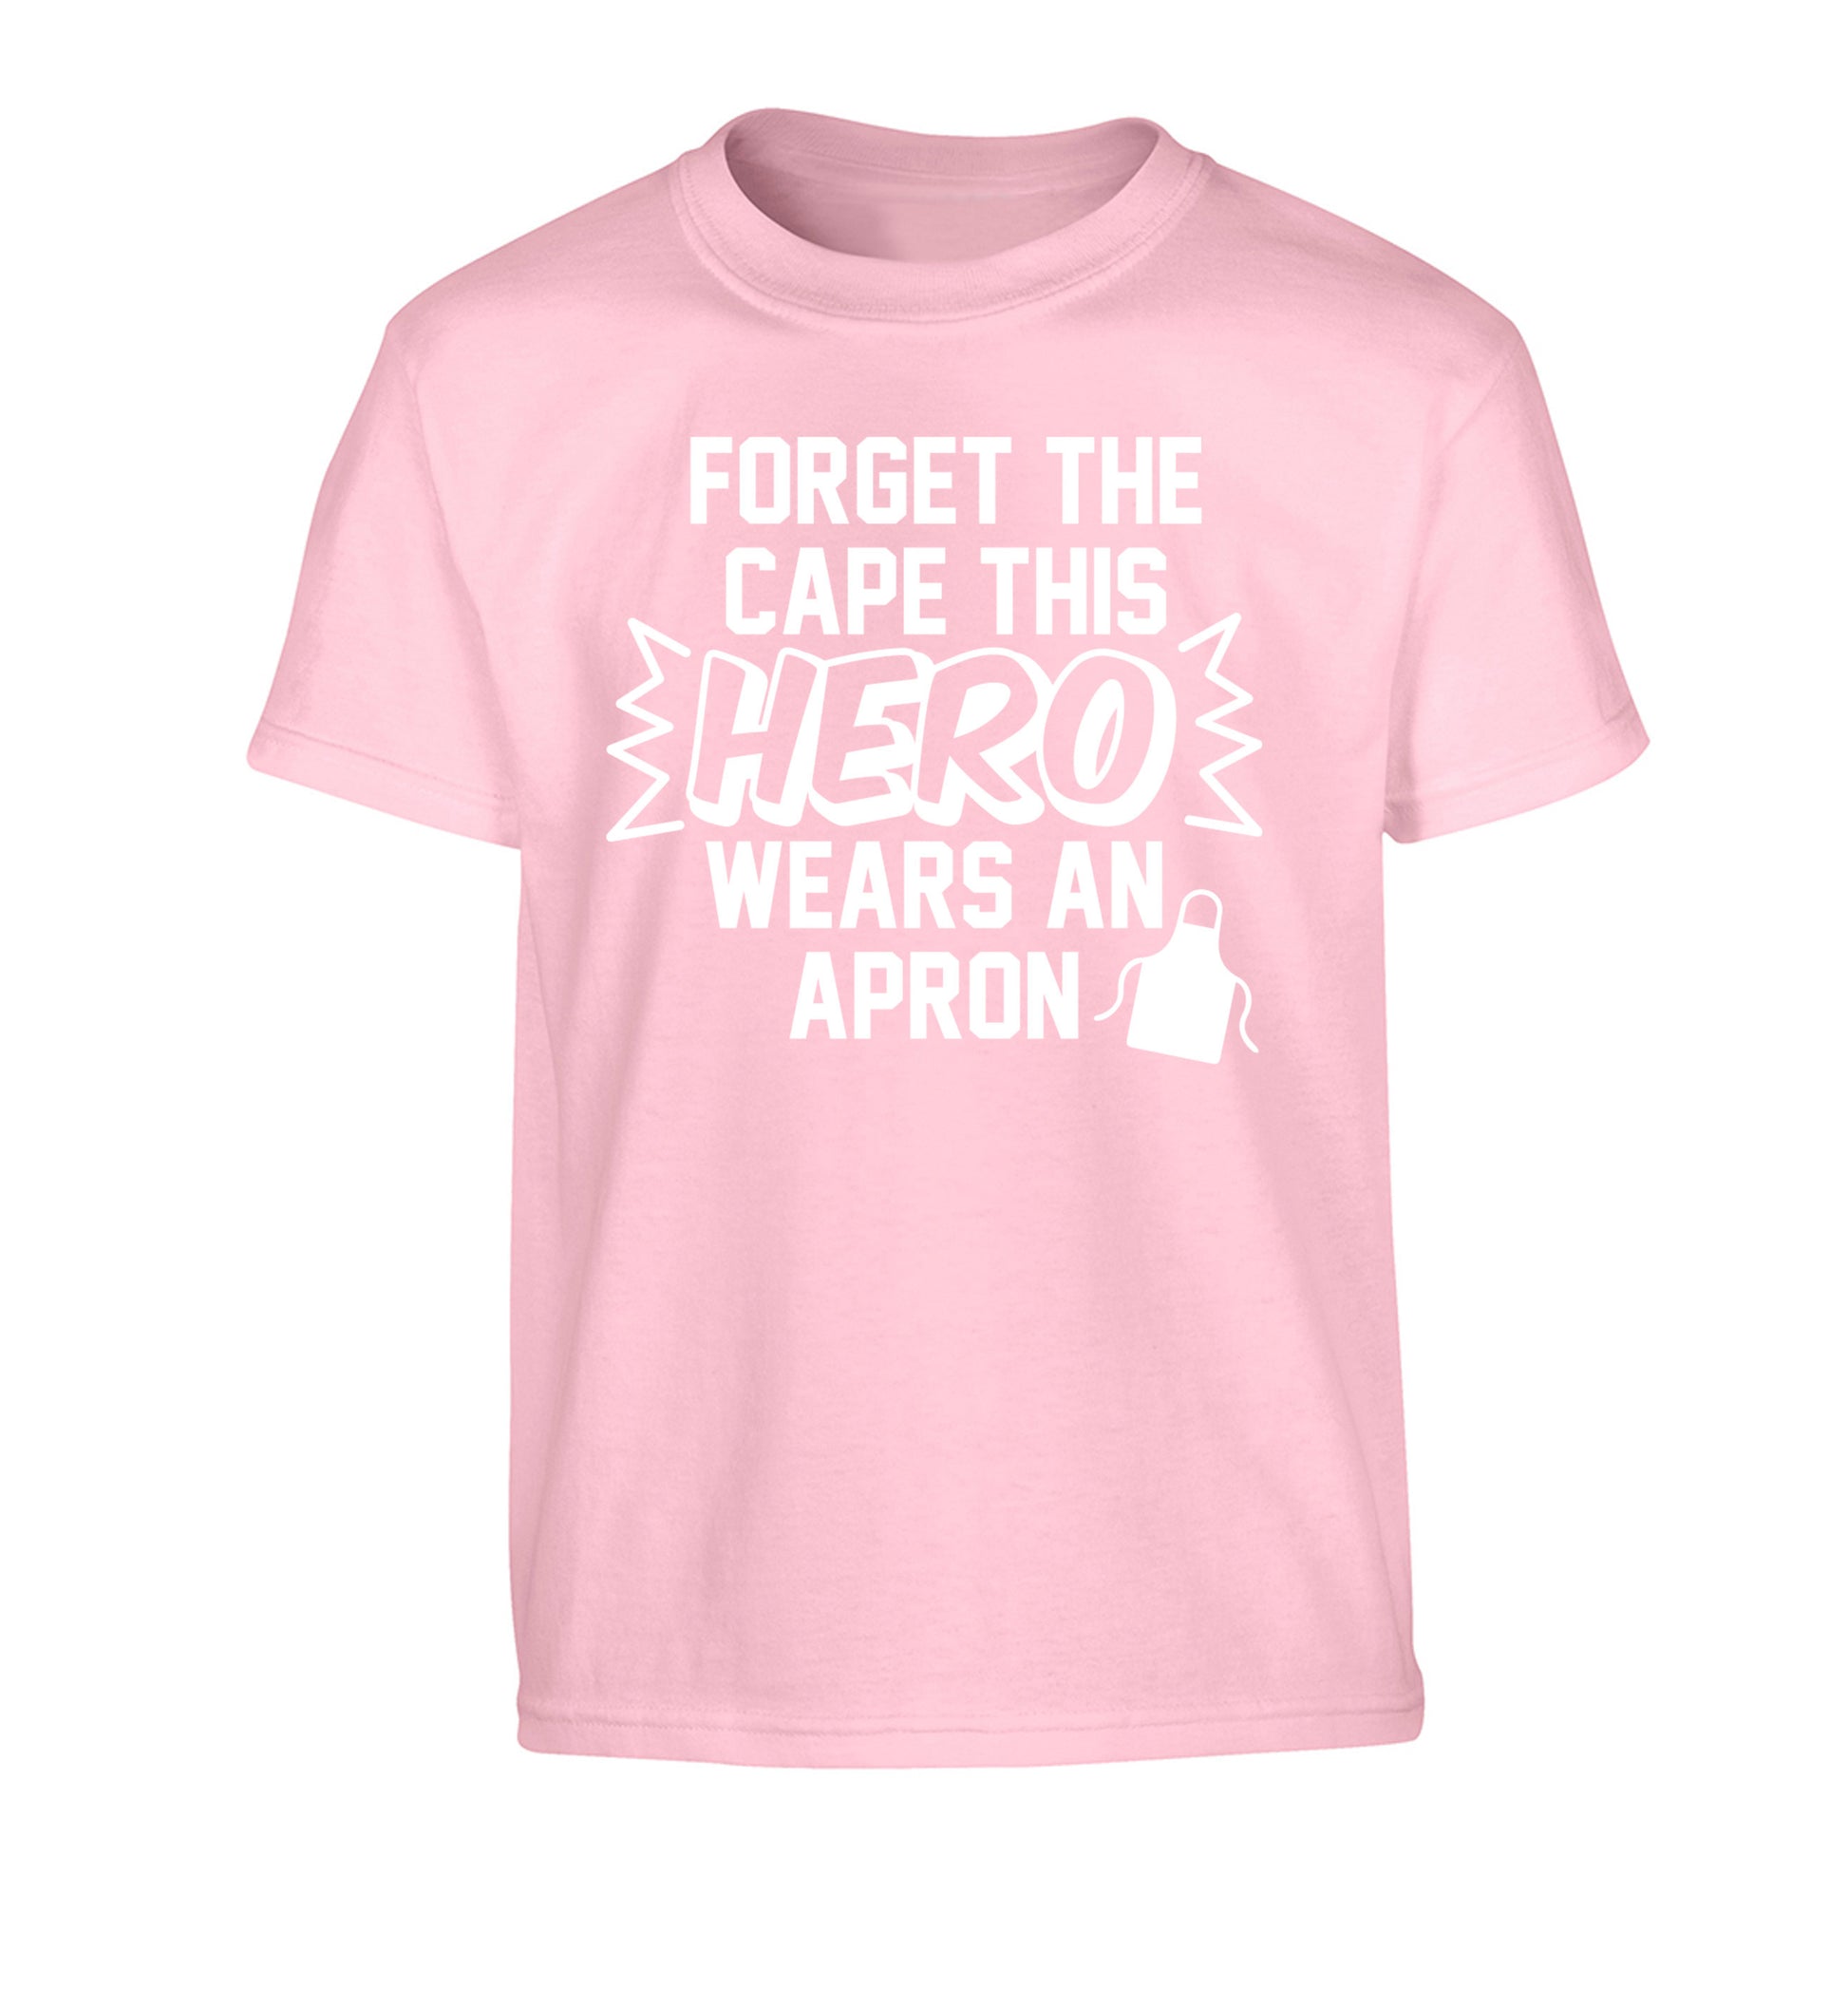 Forget the cape this hero wears an apron Children's light pink Tshirt 12-14 Years